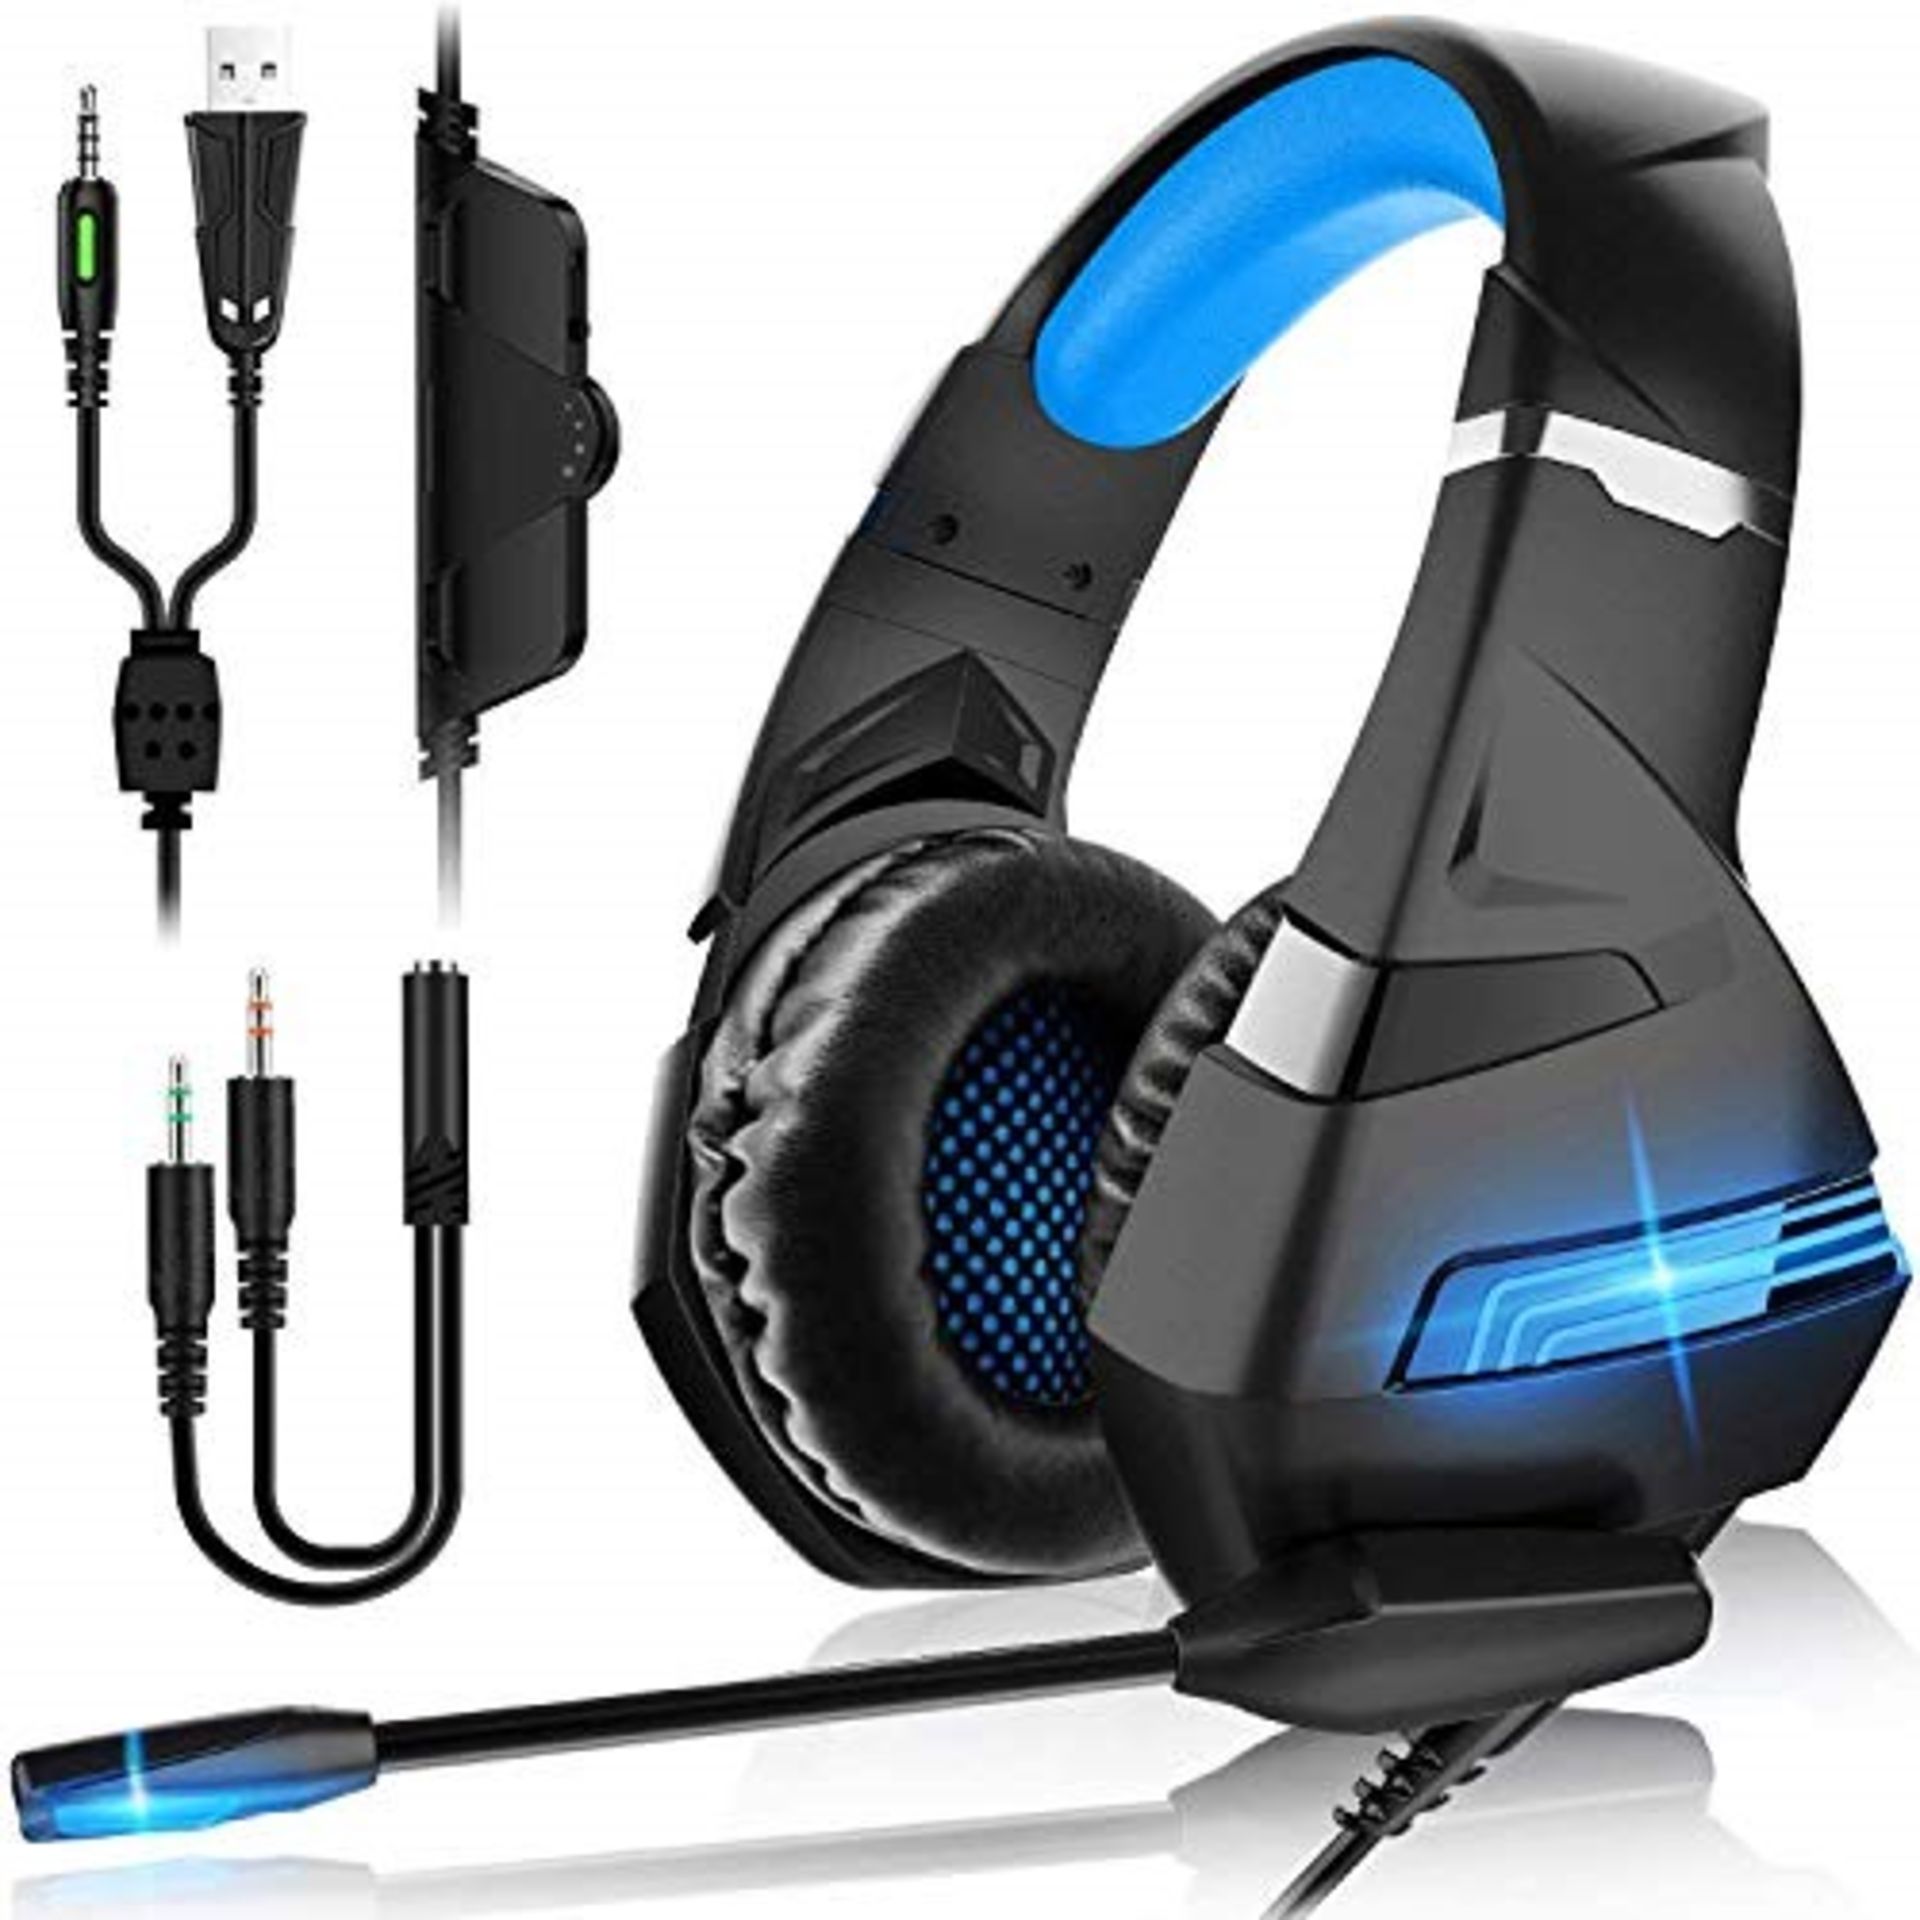 FUNINGEEK A2 Gaming Headset for PS4,Stereo Surround Sound Gaming Headset with Micropho